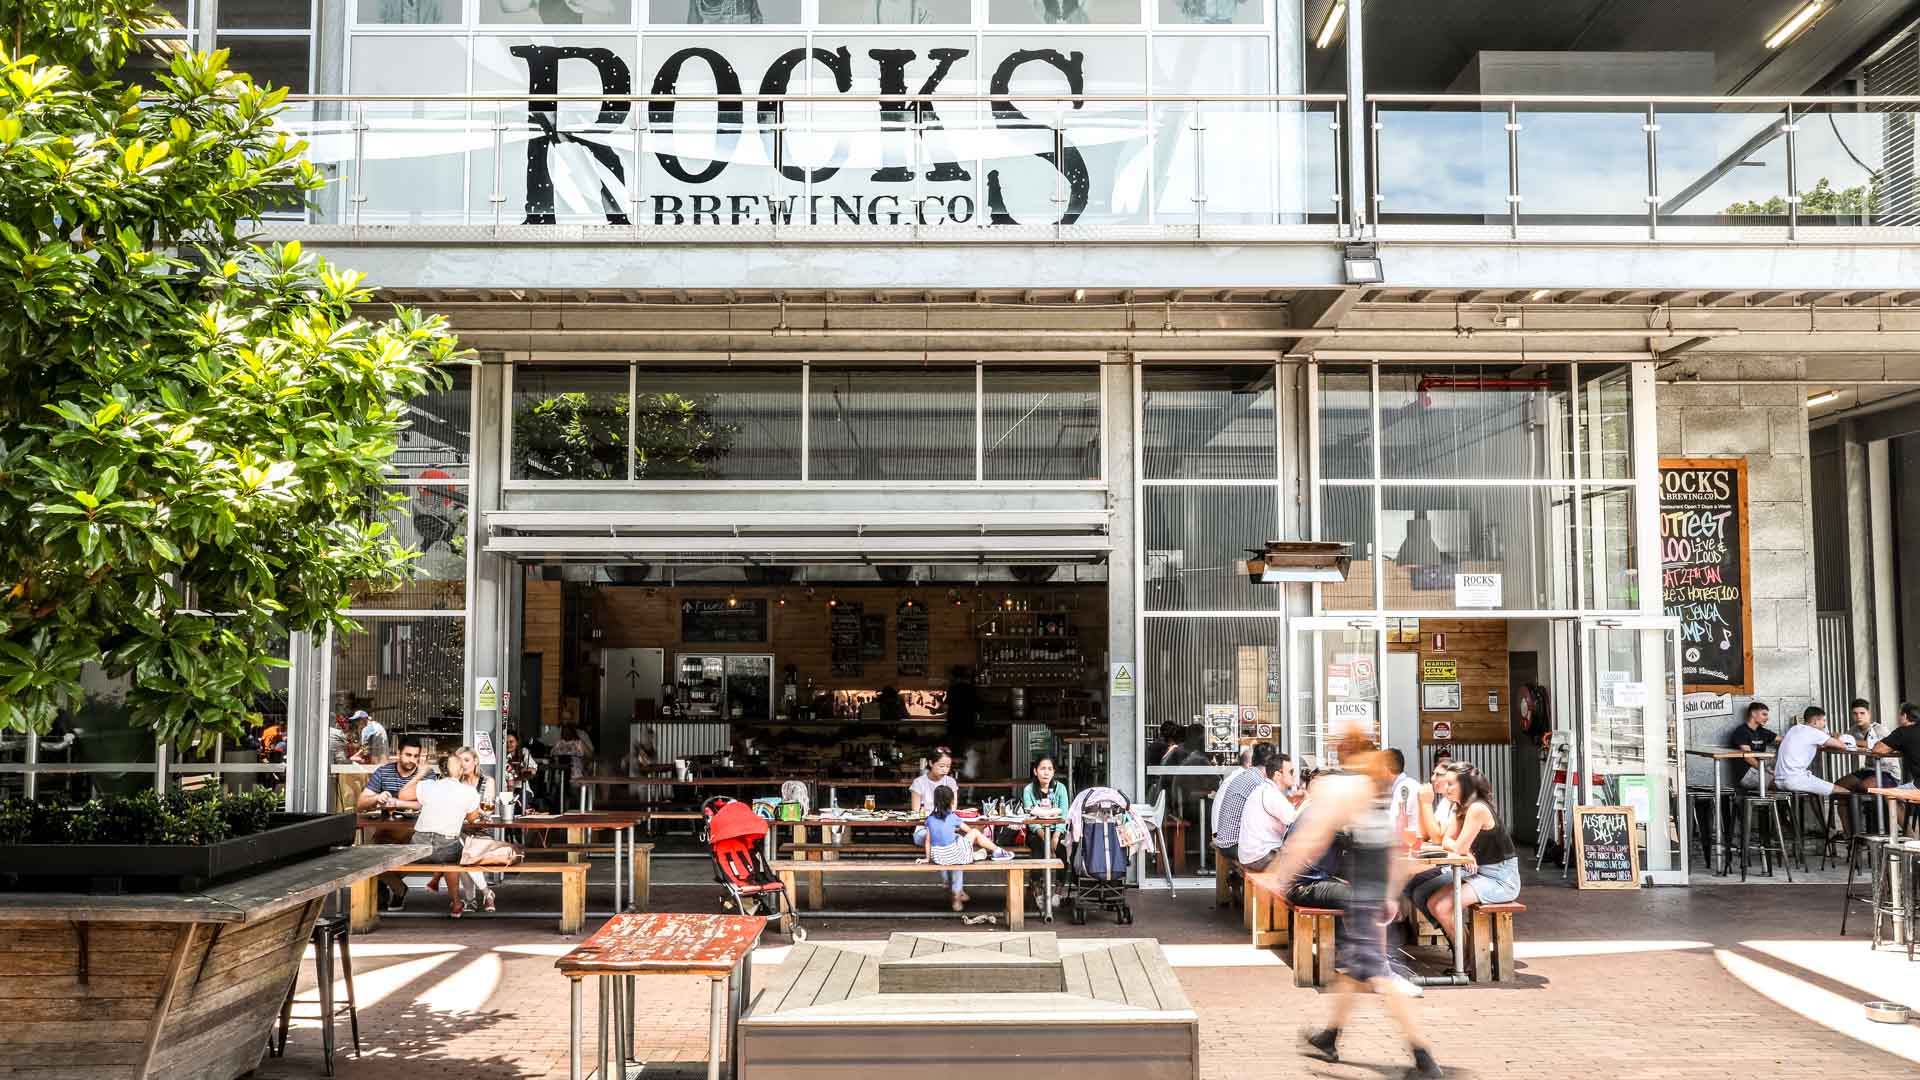 the exterior of Rocks Brewing Co in Alexandria, Sydney - sydney brewery and pub